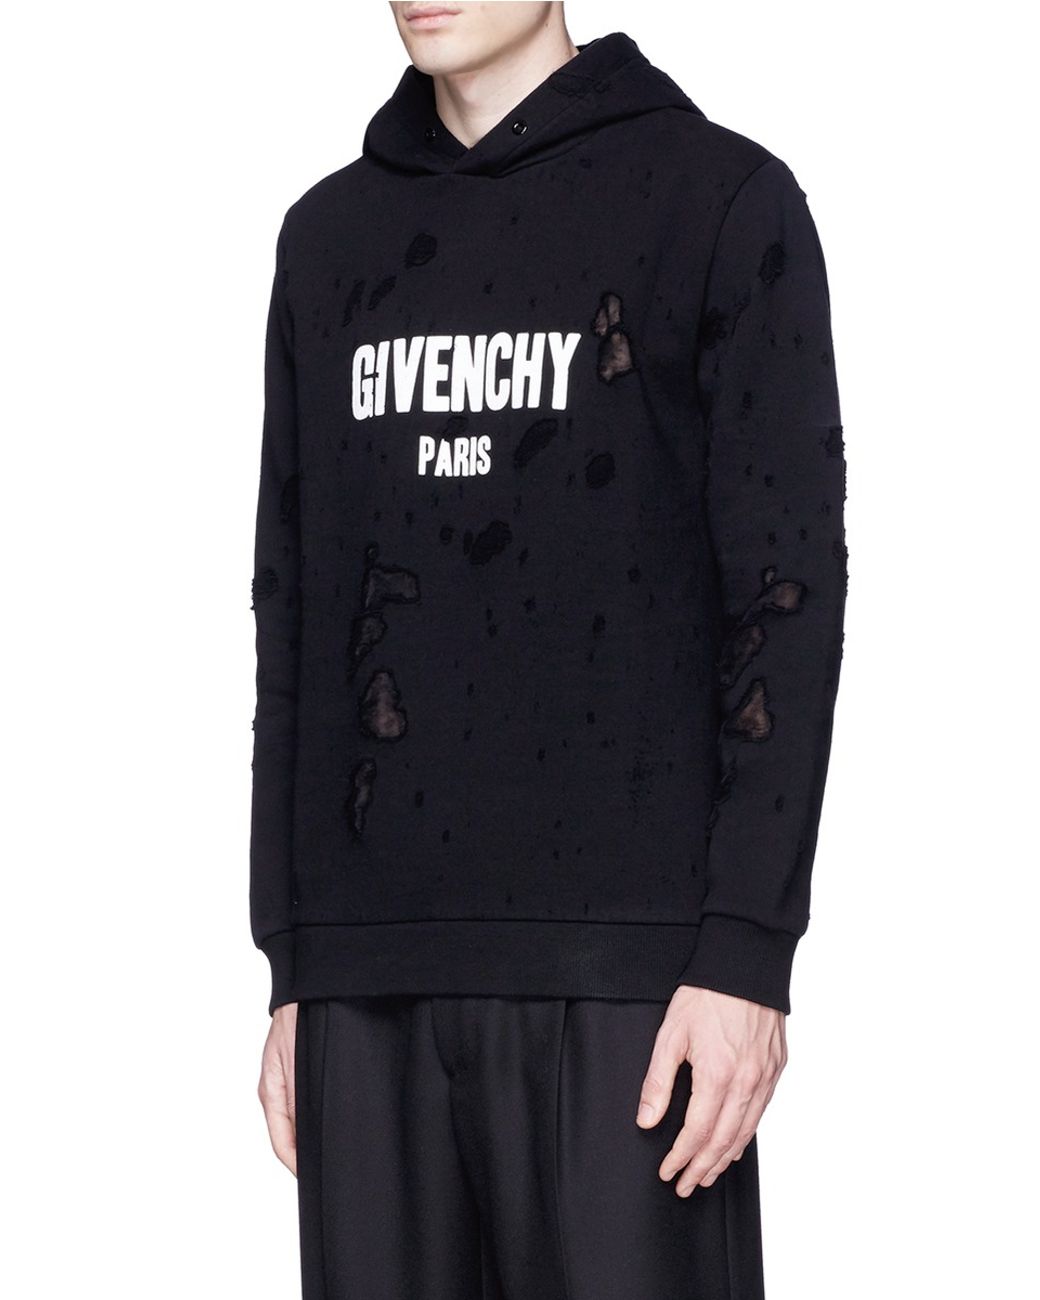 Givenchy Logo Print Distressed Hoodie in Black for Men | Lyst UK